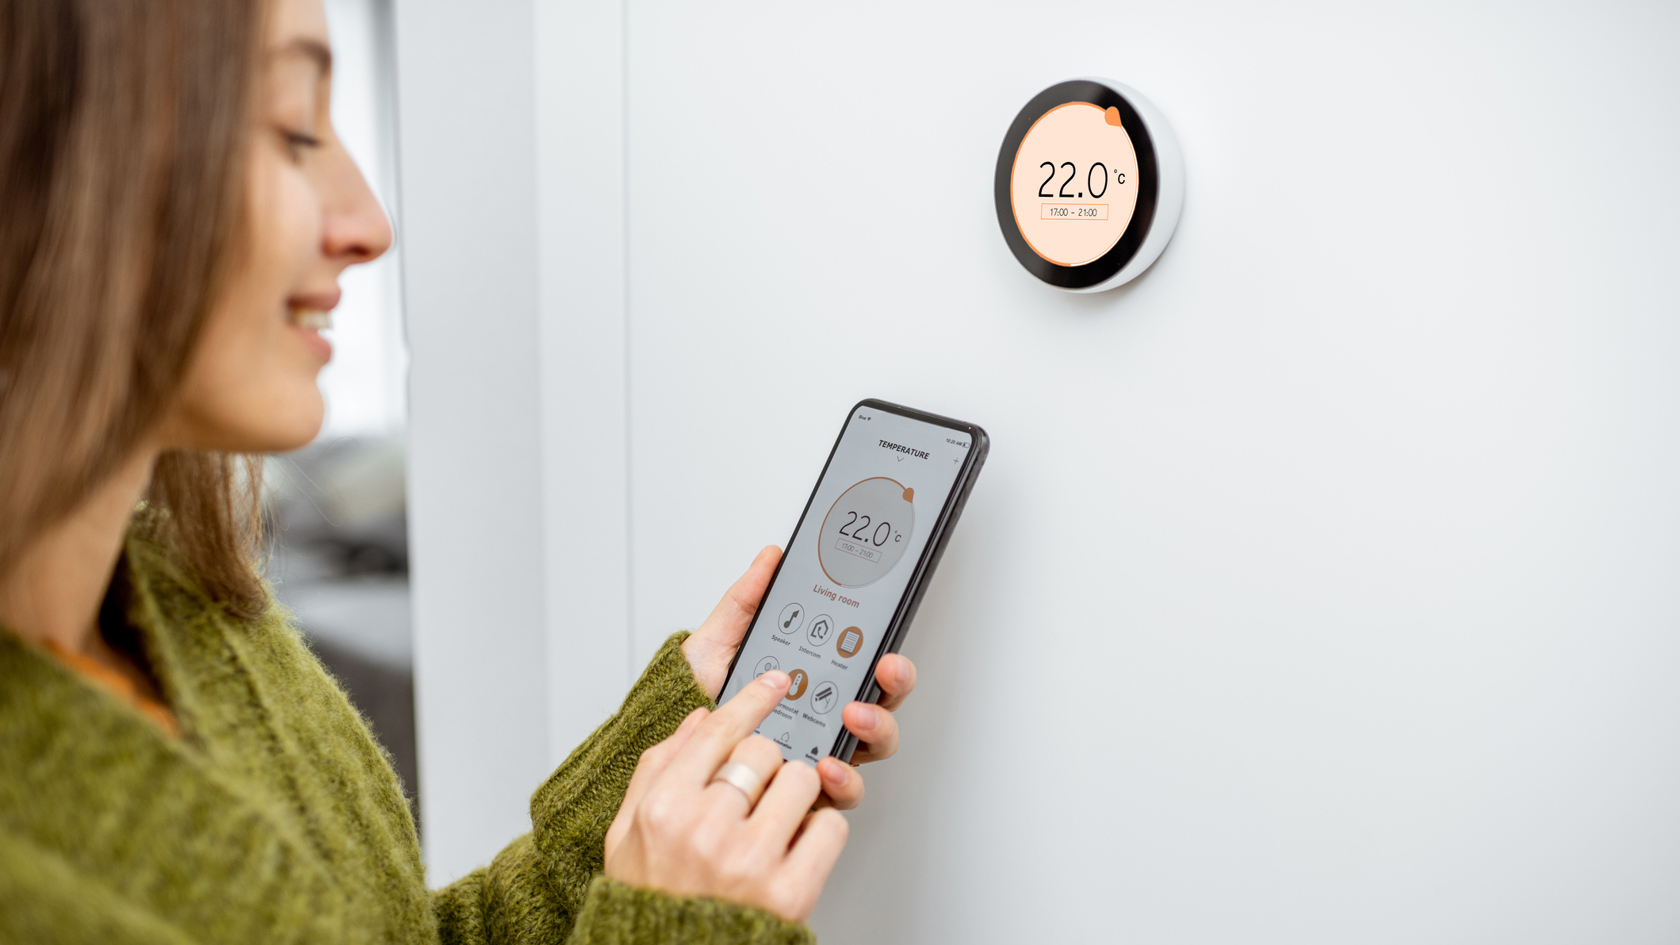 A young woman uses her phone to control her smart heating system.